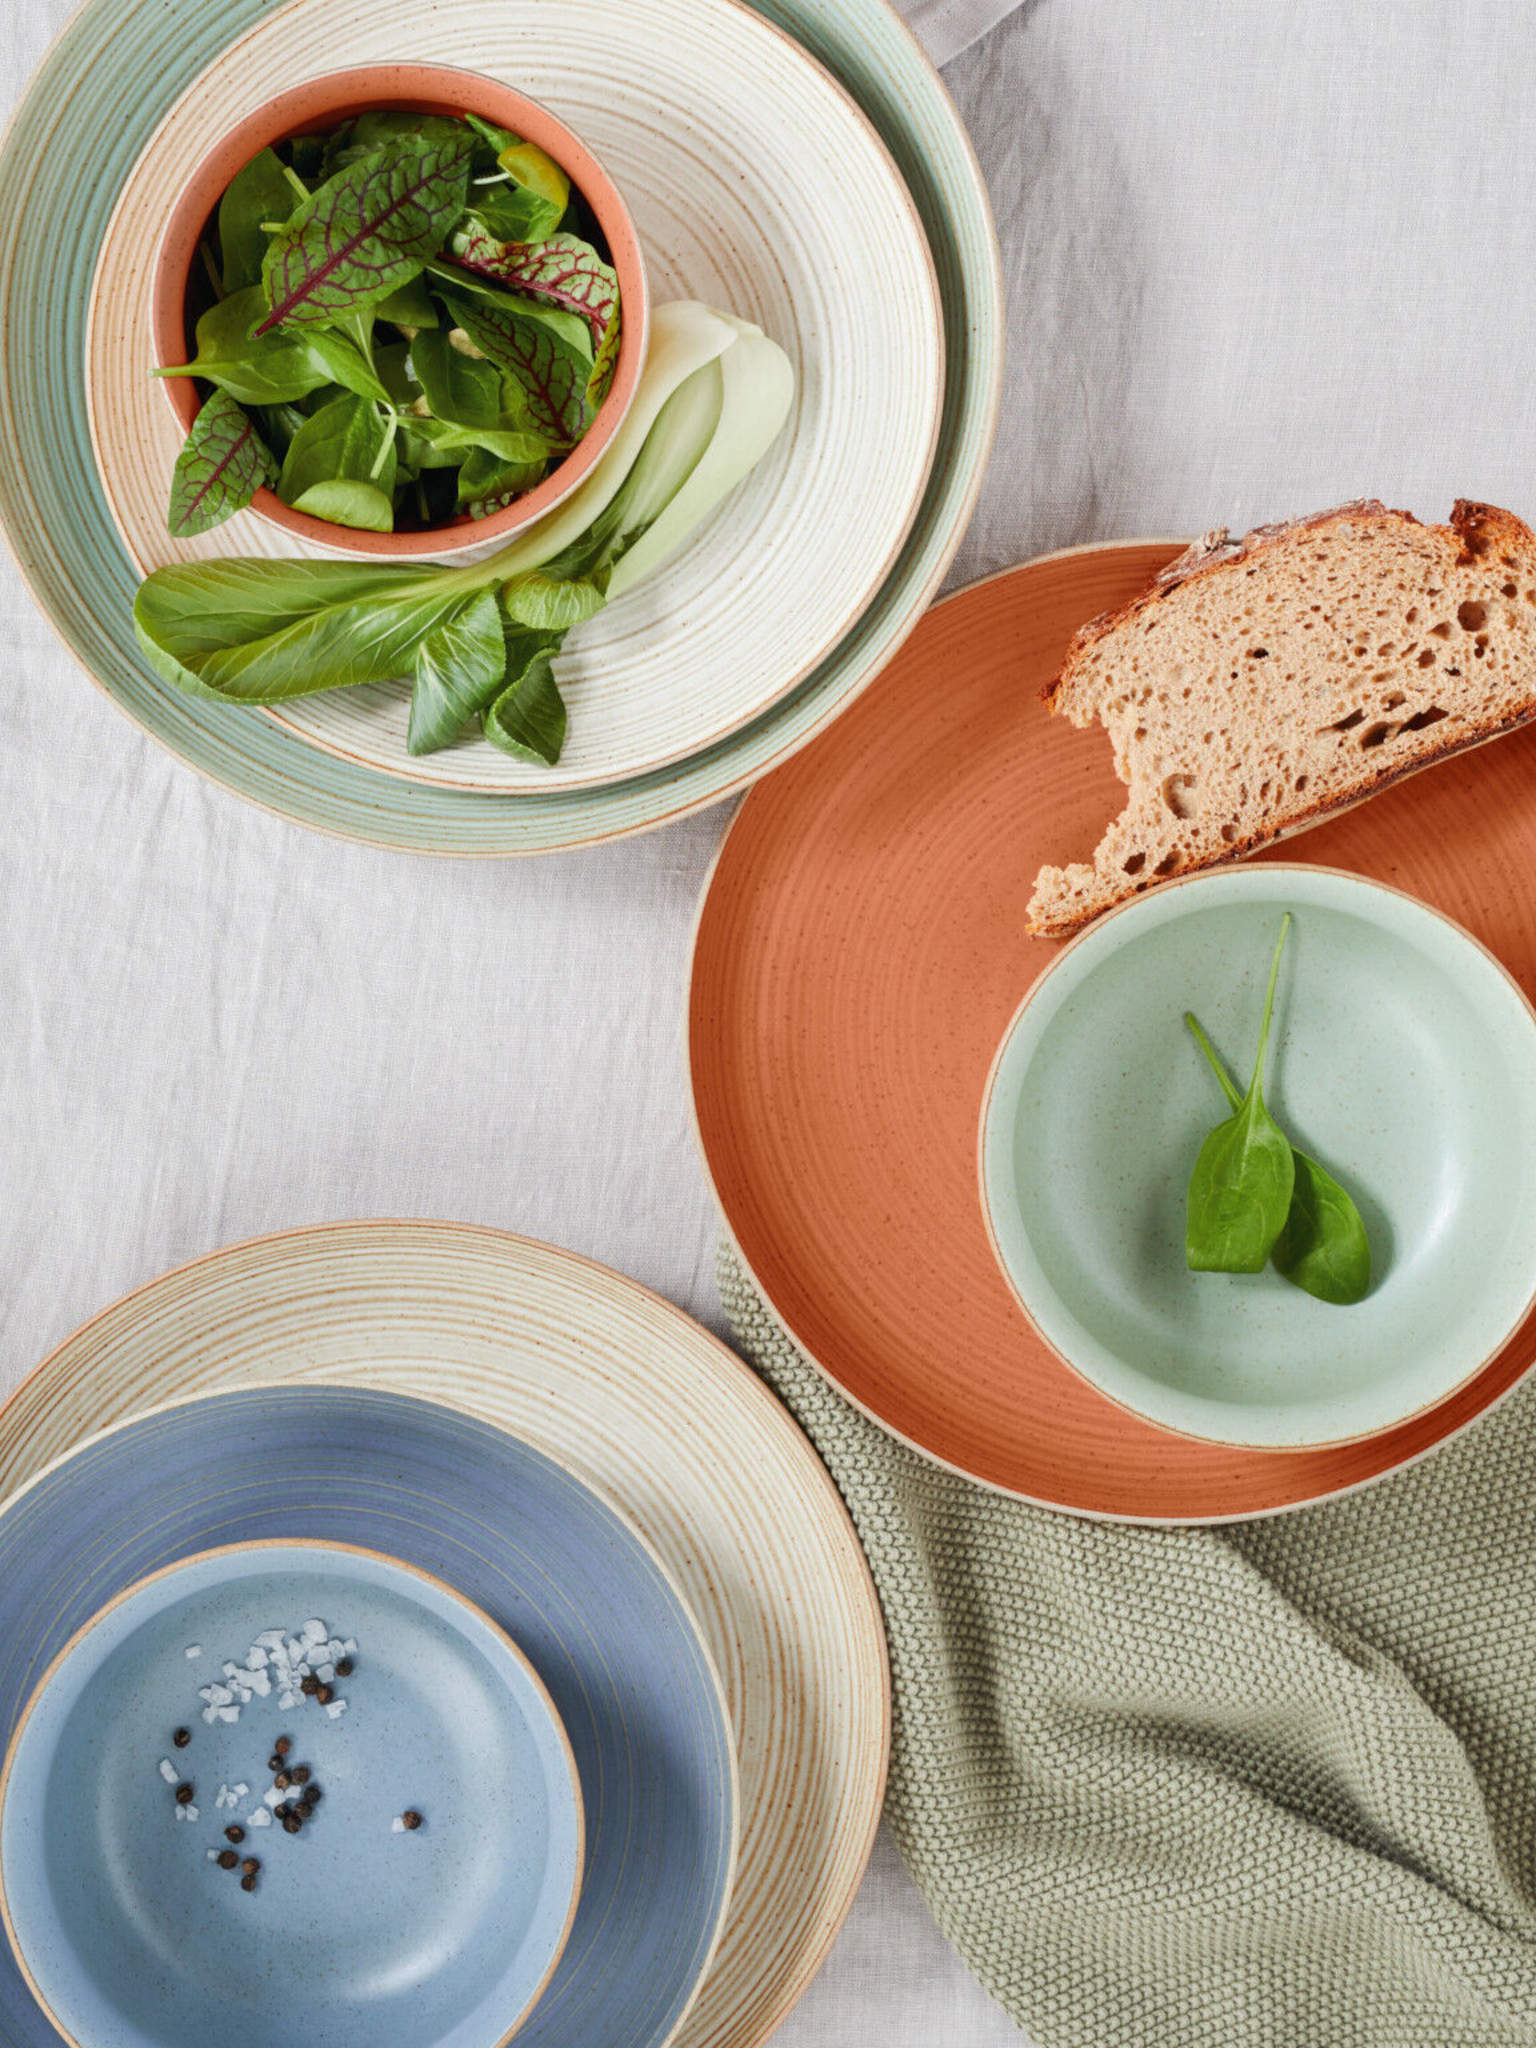 Thomas Nature plates in different sizes and colors